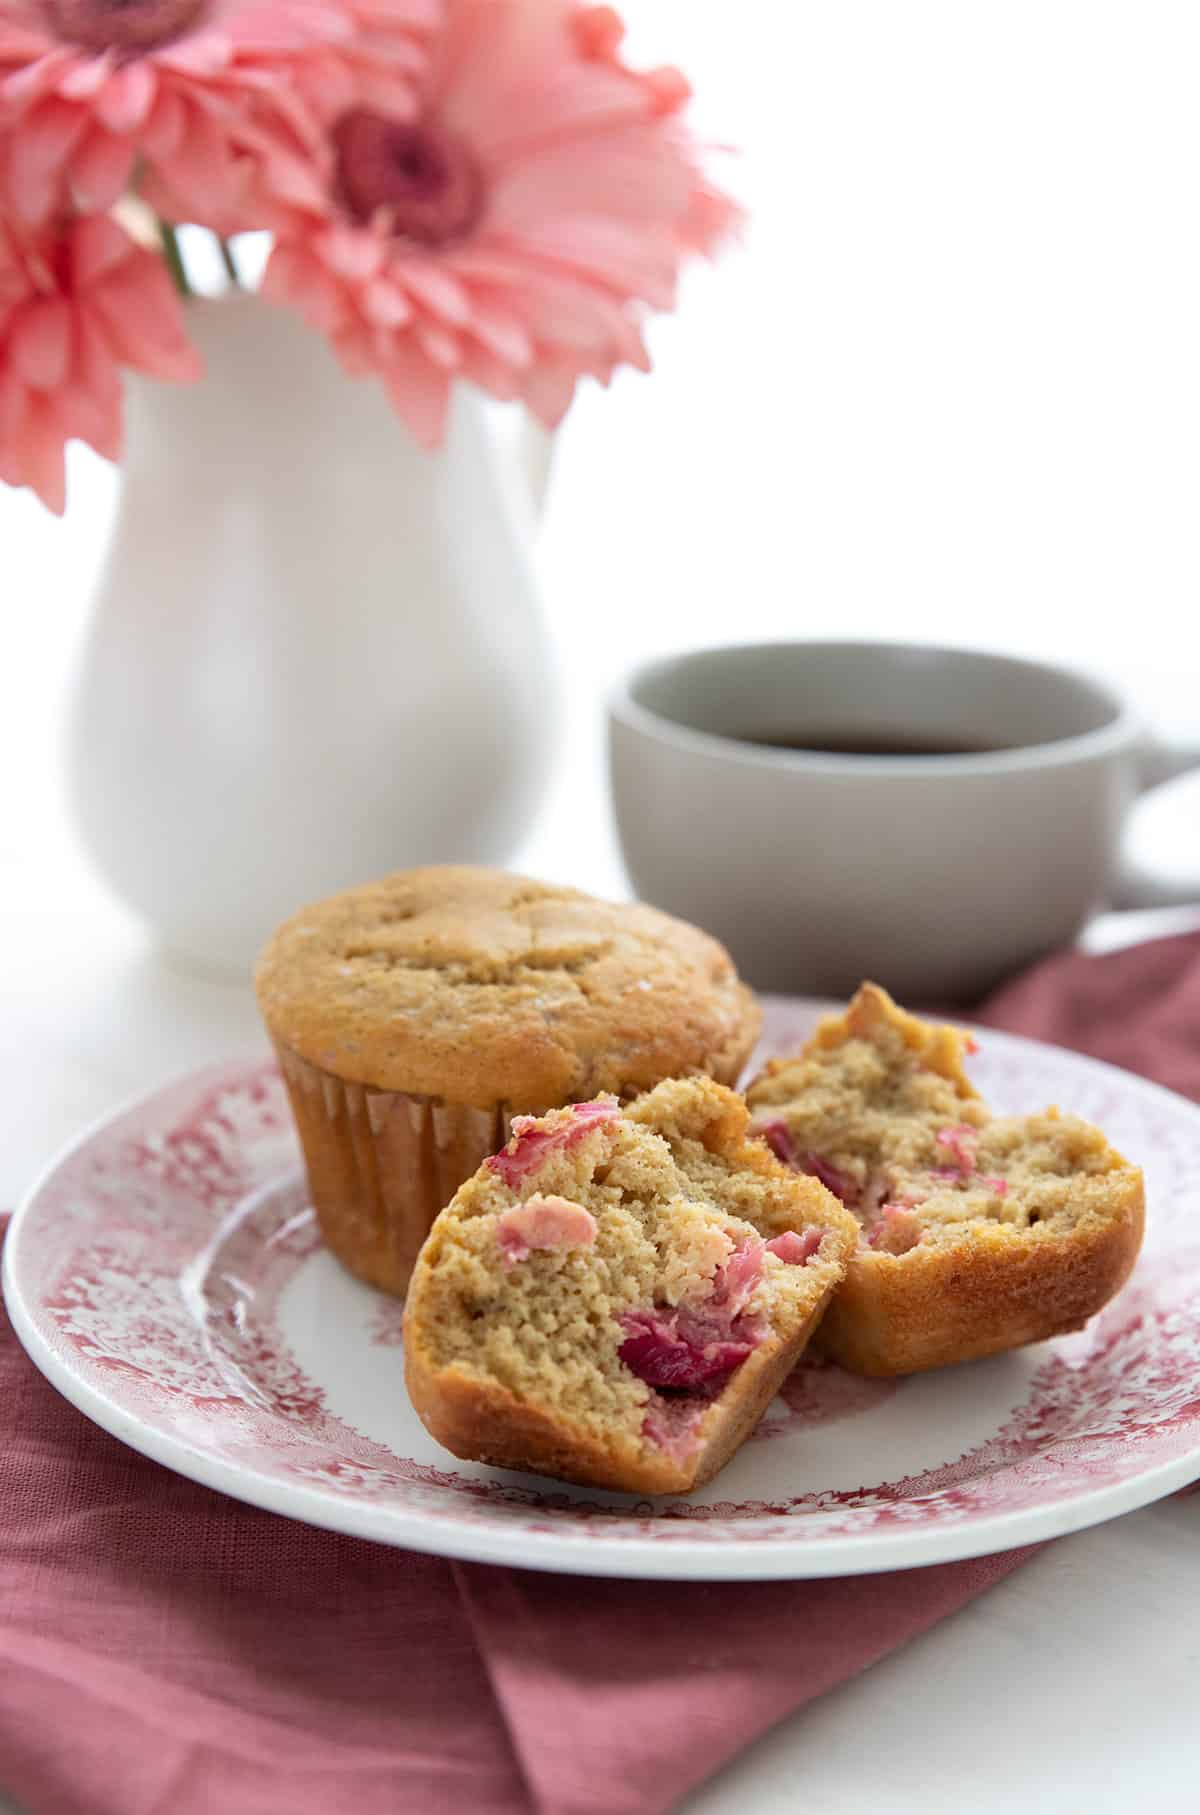 Two keto rhubarb muffins on a red patterned plate, with one broken open to show the inside.